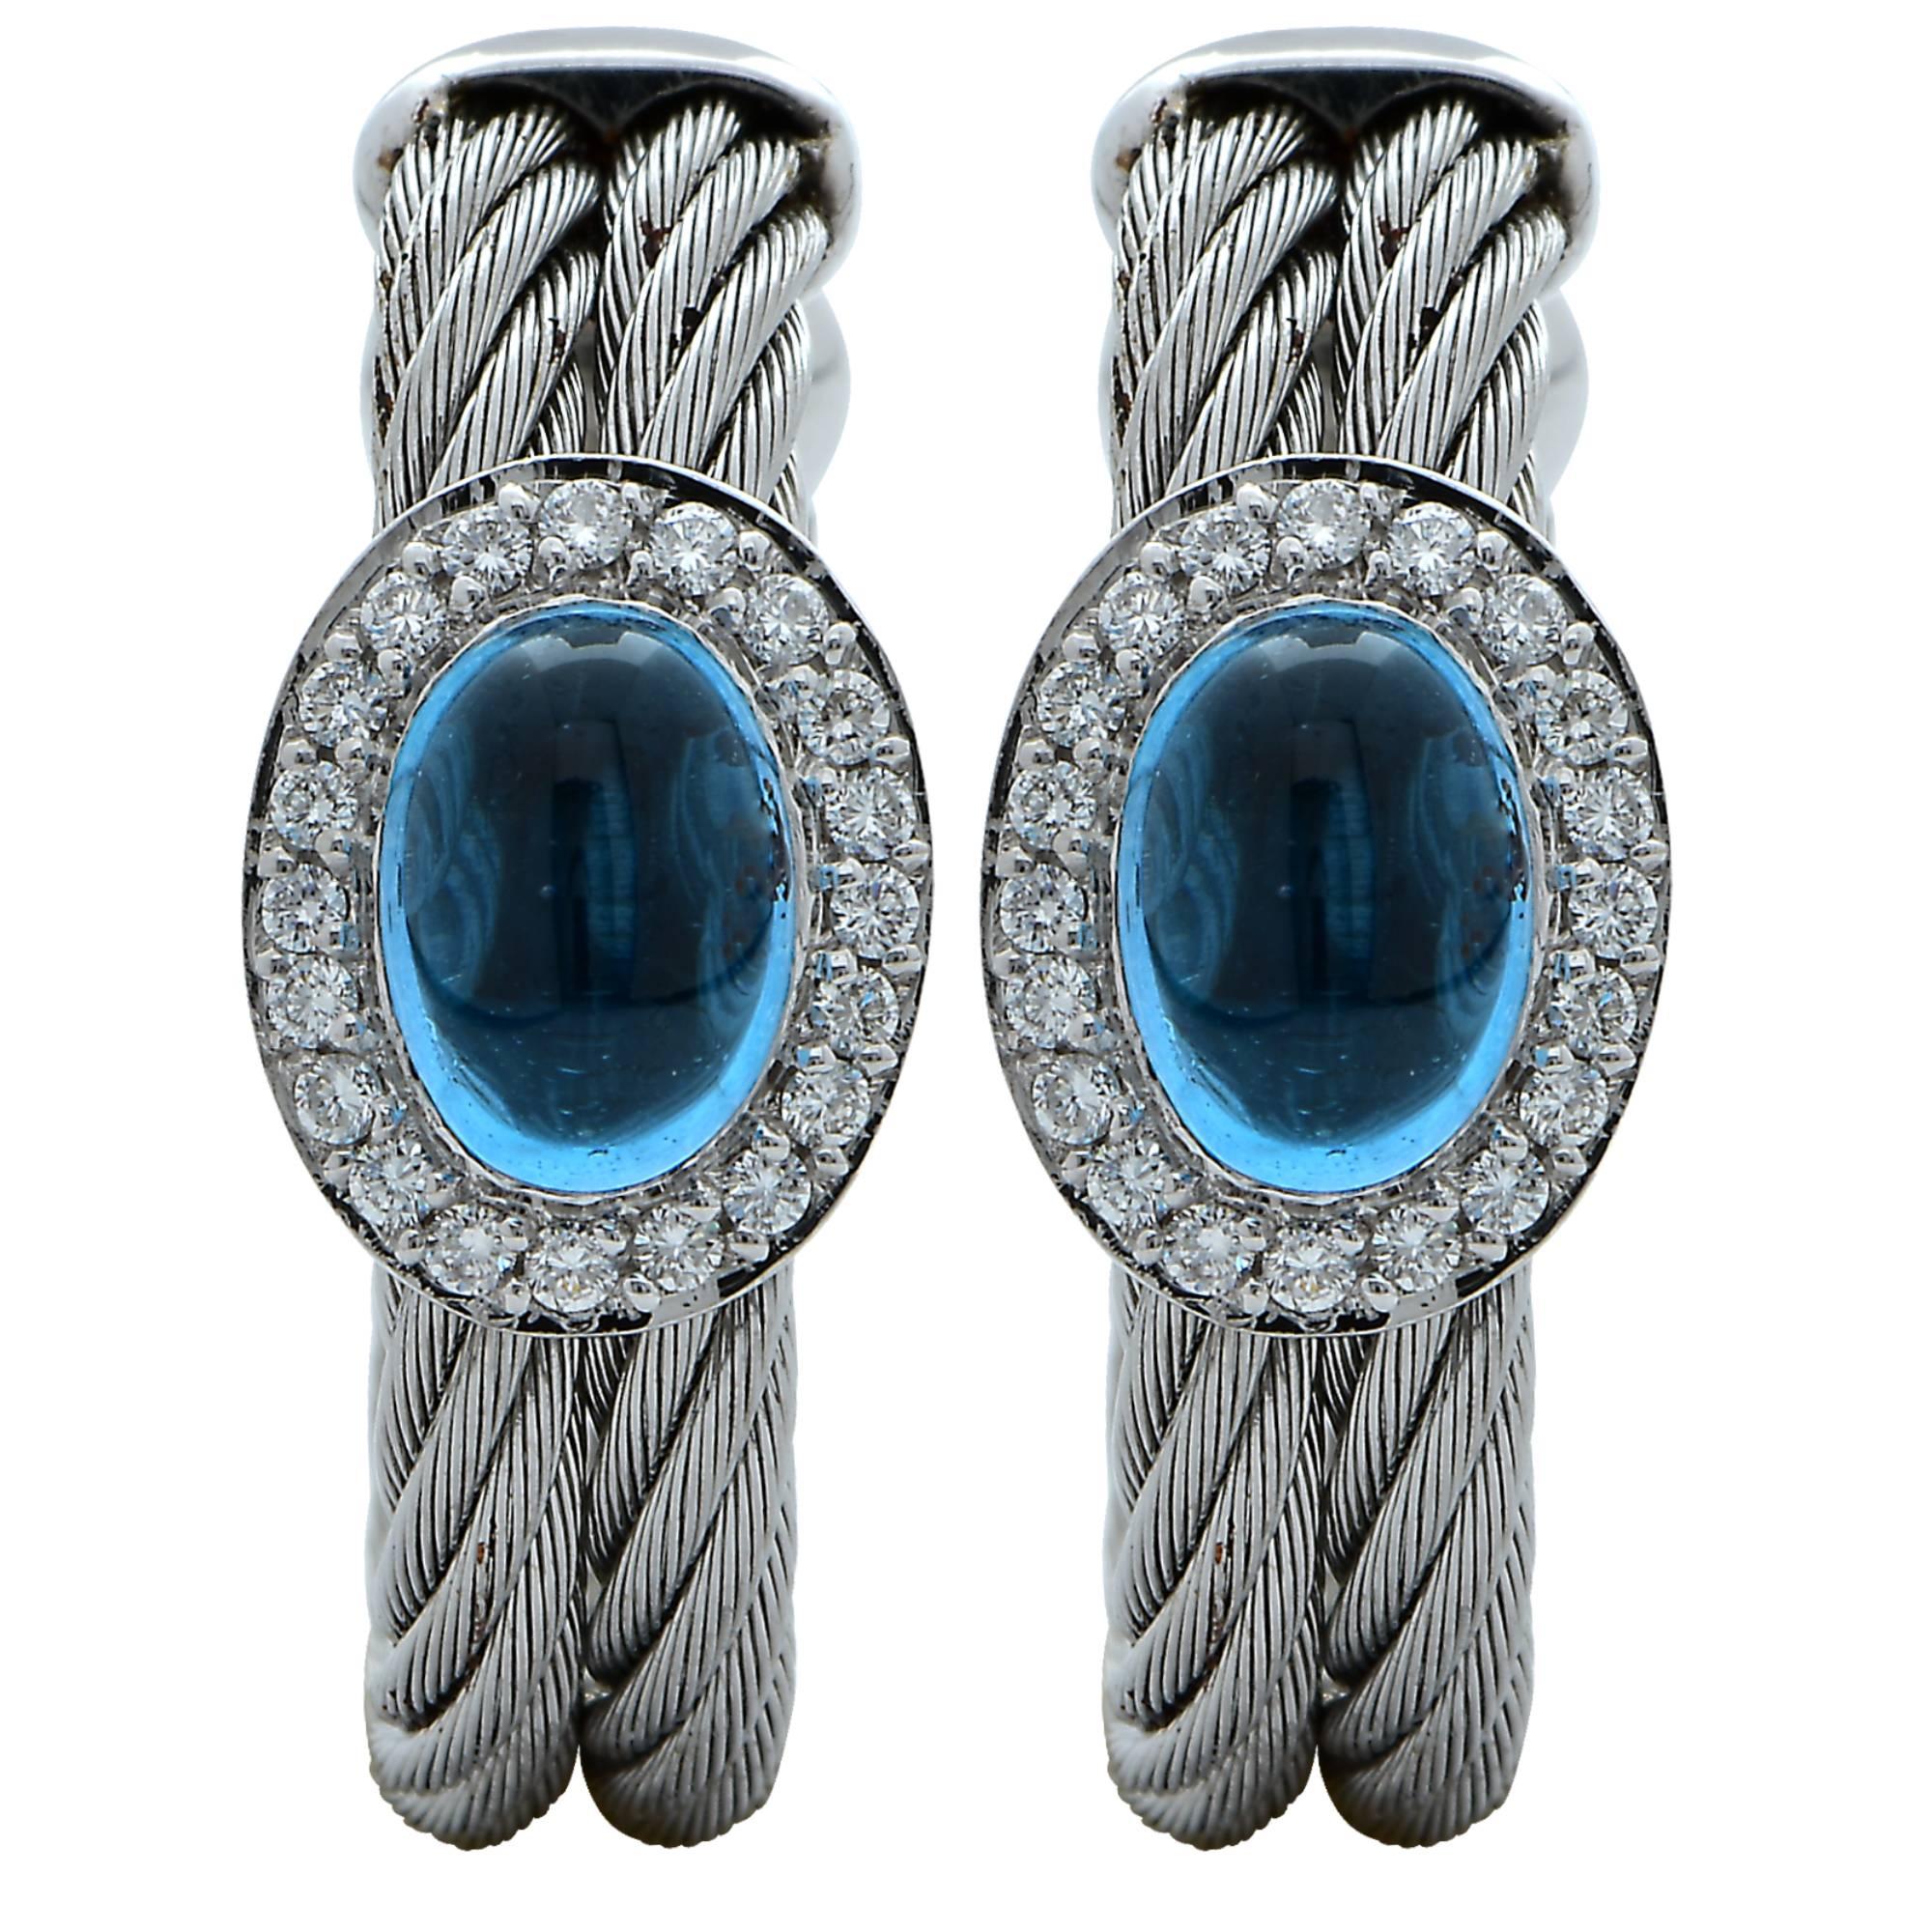 18K white gold and stainless-steel earrings, bangle, and ring set featuring electric vibrant blue cabochon topaz’s surrounded by 84 round brilliant cut diamonds weighing approximately .50ct G VS-SI set on top of a stainless steel twisted wire. The